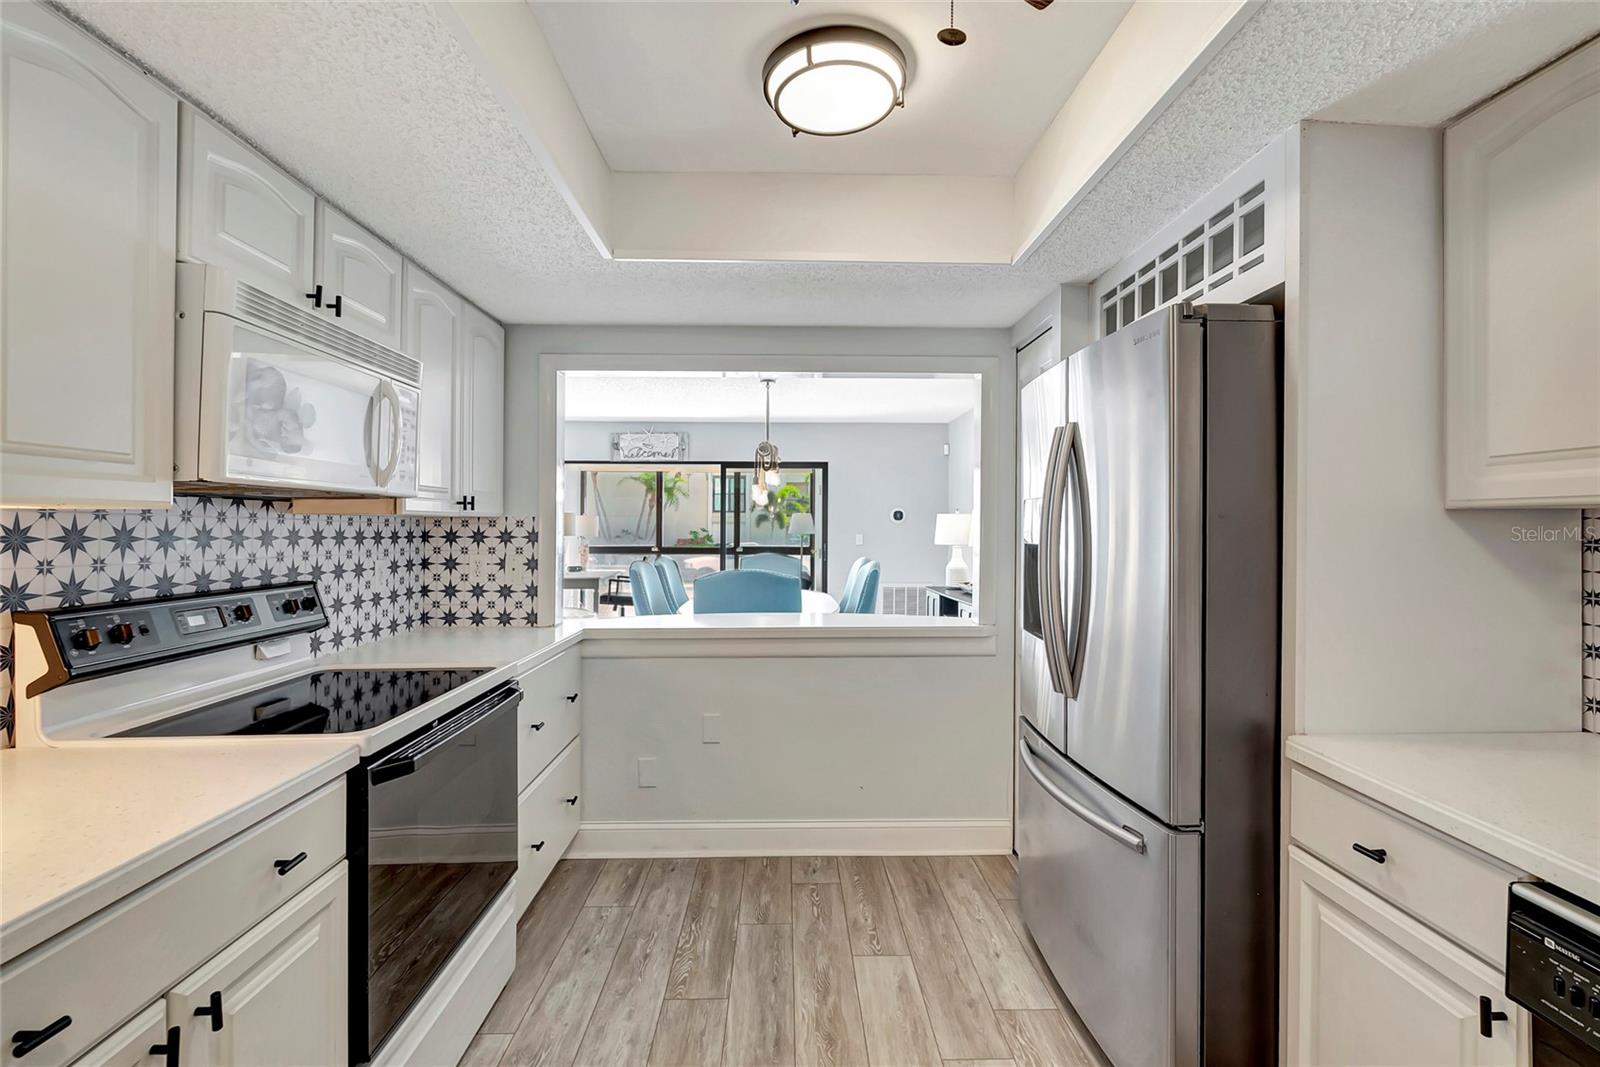 With sleek countertops, modern appliances, and ample storage space, this kitchen is as practical as it is stylish.